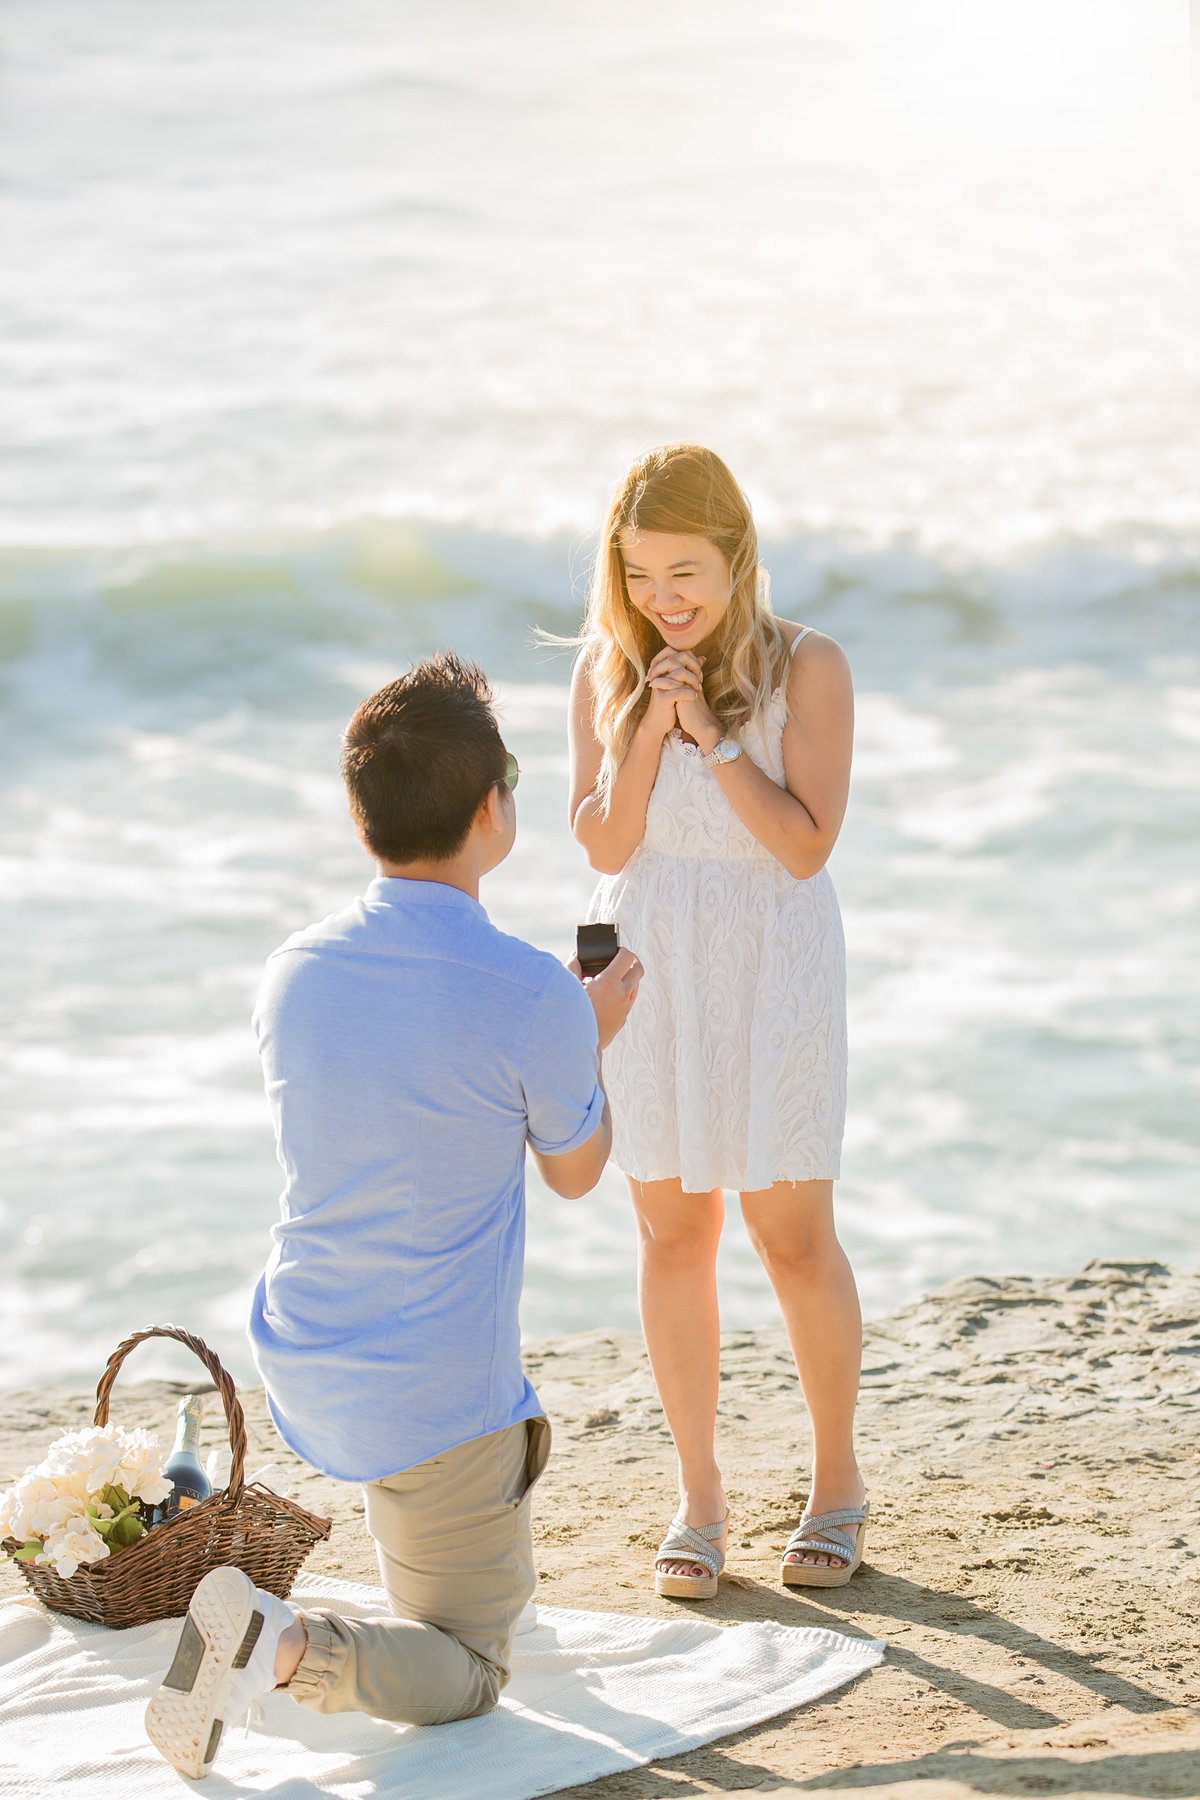 babsie-ly-photography-surprise-proposal-photographer-san-diego-california-sunset-cliffs-epic-scenery-015